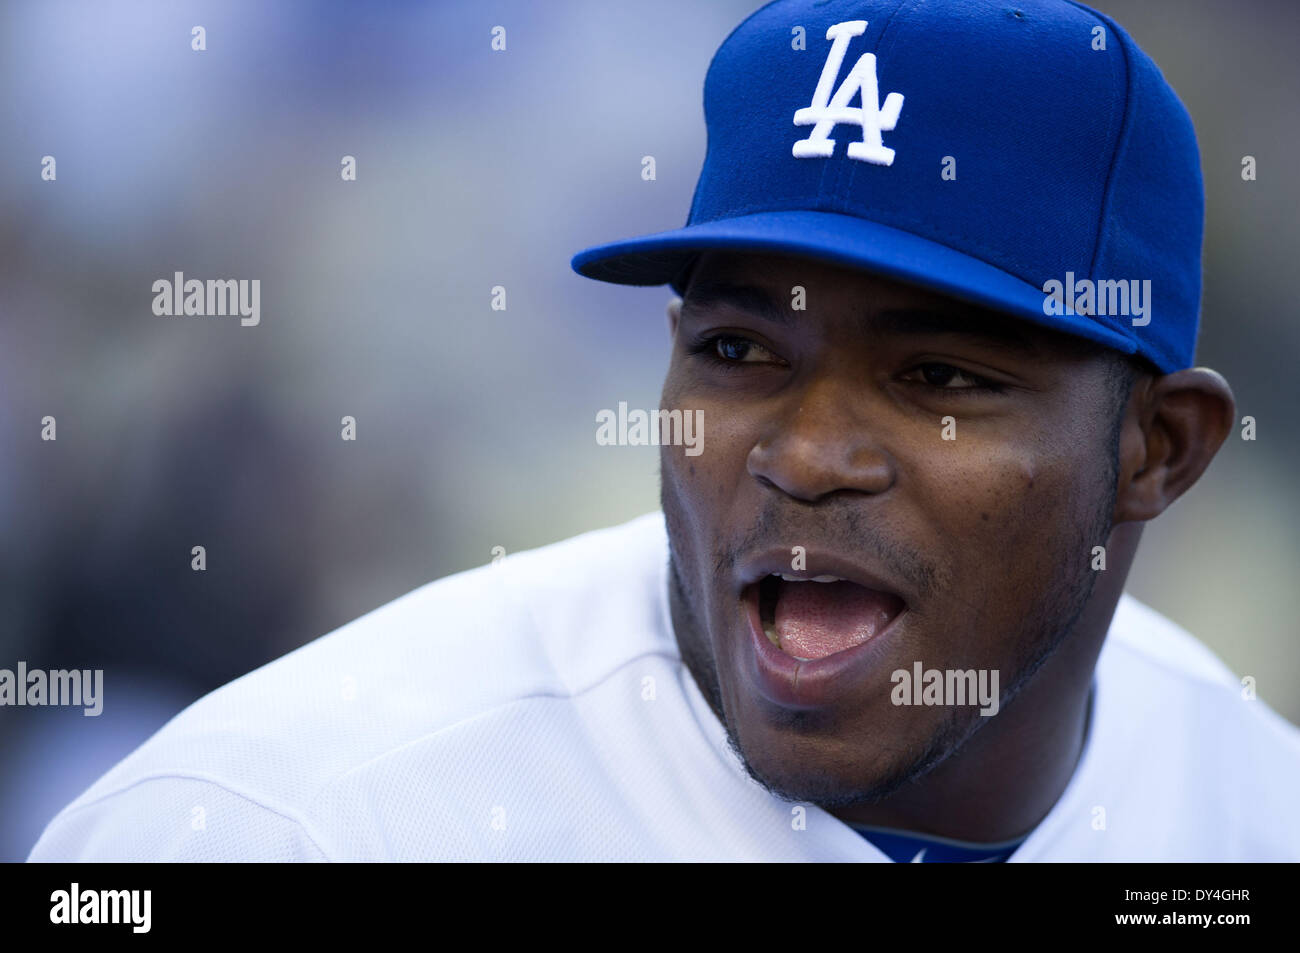 Los Angeles, CA, USA. 6th Apr, 2014. April 6, 2014 - Los Angeles, CA, United States of America - Los Angeles Dodgers right fielder Yasiel Puig (66) during the MLB game between San Francisco Giants and Los Angeles Dodgers at the Dodgers Stadium in Los Angeles, CA. © csm/Alamy Live News Stock Photo